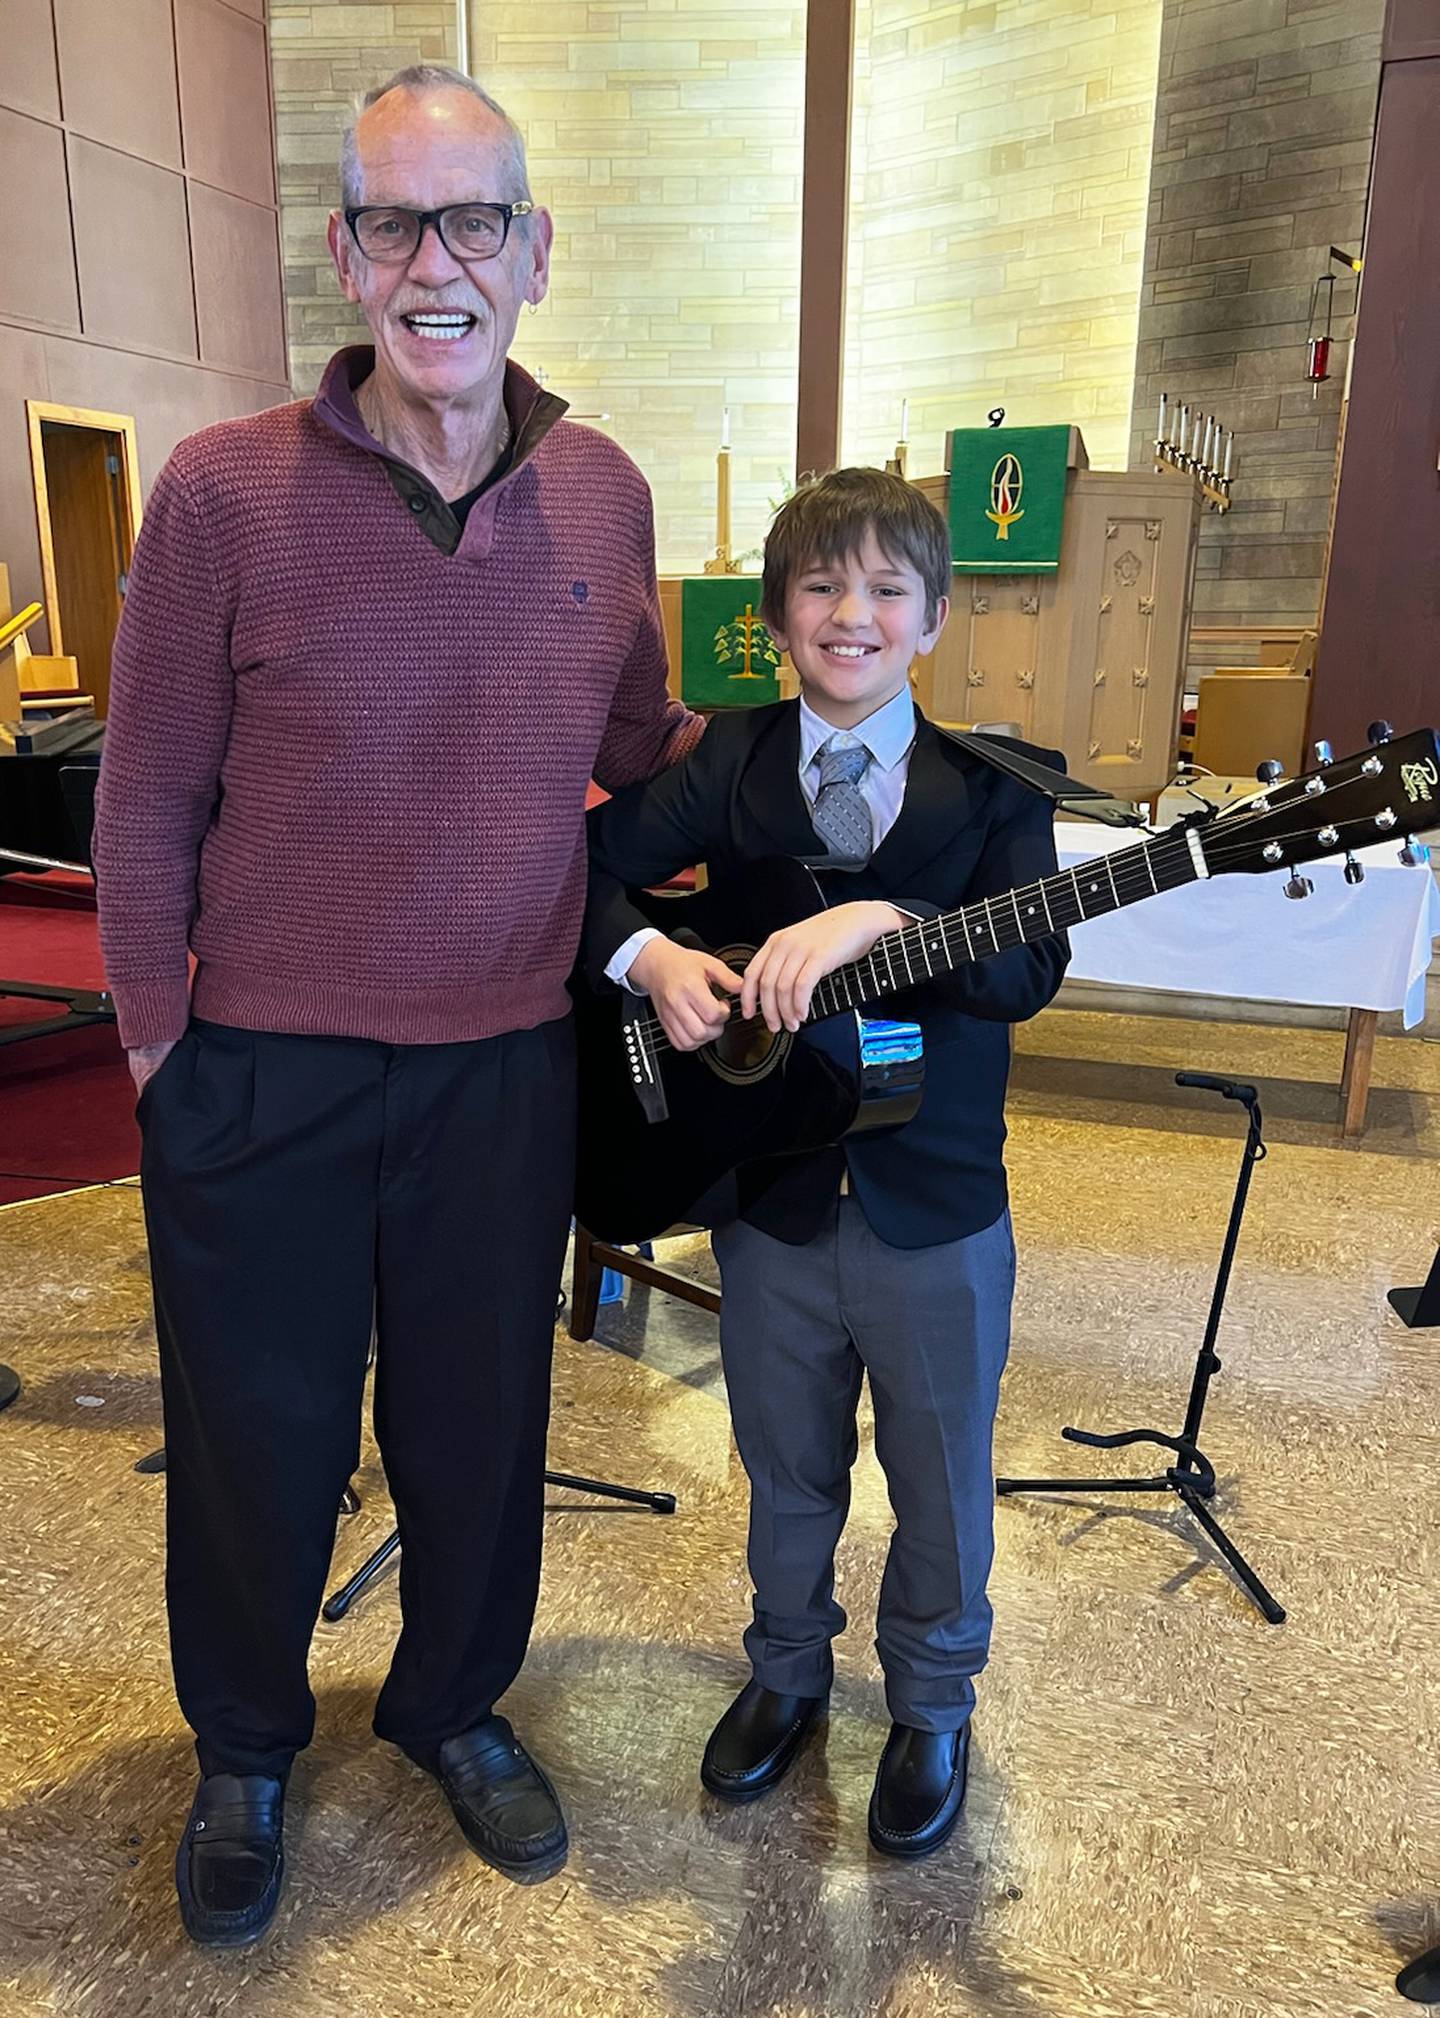 Tucker Crandall (right) poses with Woodlawn Arts Academy guitar instructor James Miller after the Academy’s winter music recital at St. Paul Lutheran Church, Sterling.